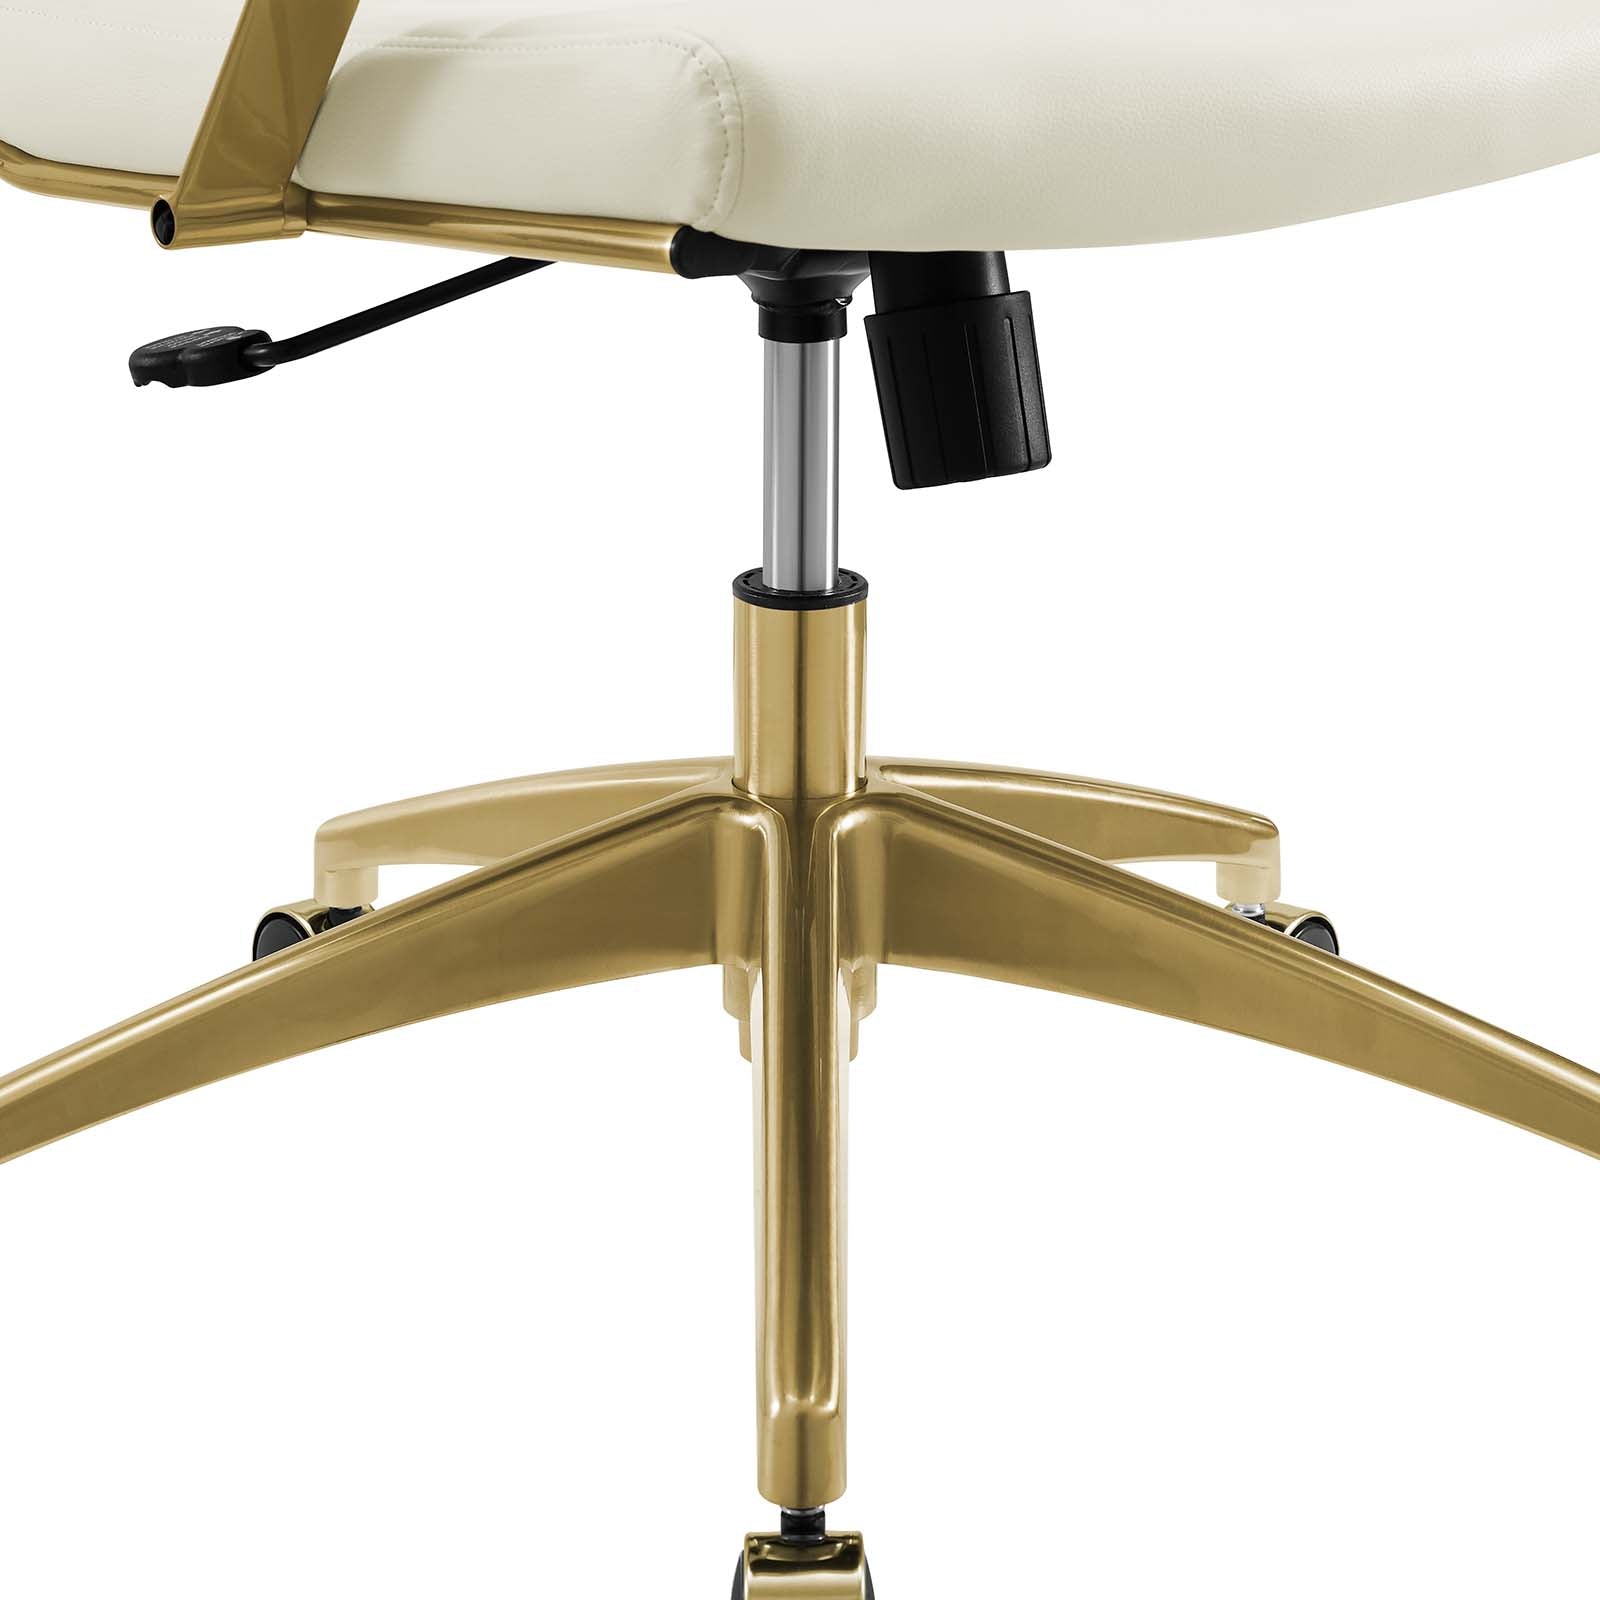 Jive Gold Stainless Steel Midback Office Chair - East Shore Modern Home Furnishings